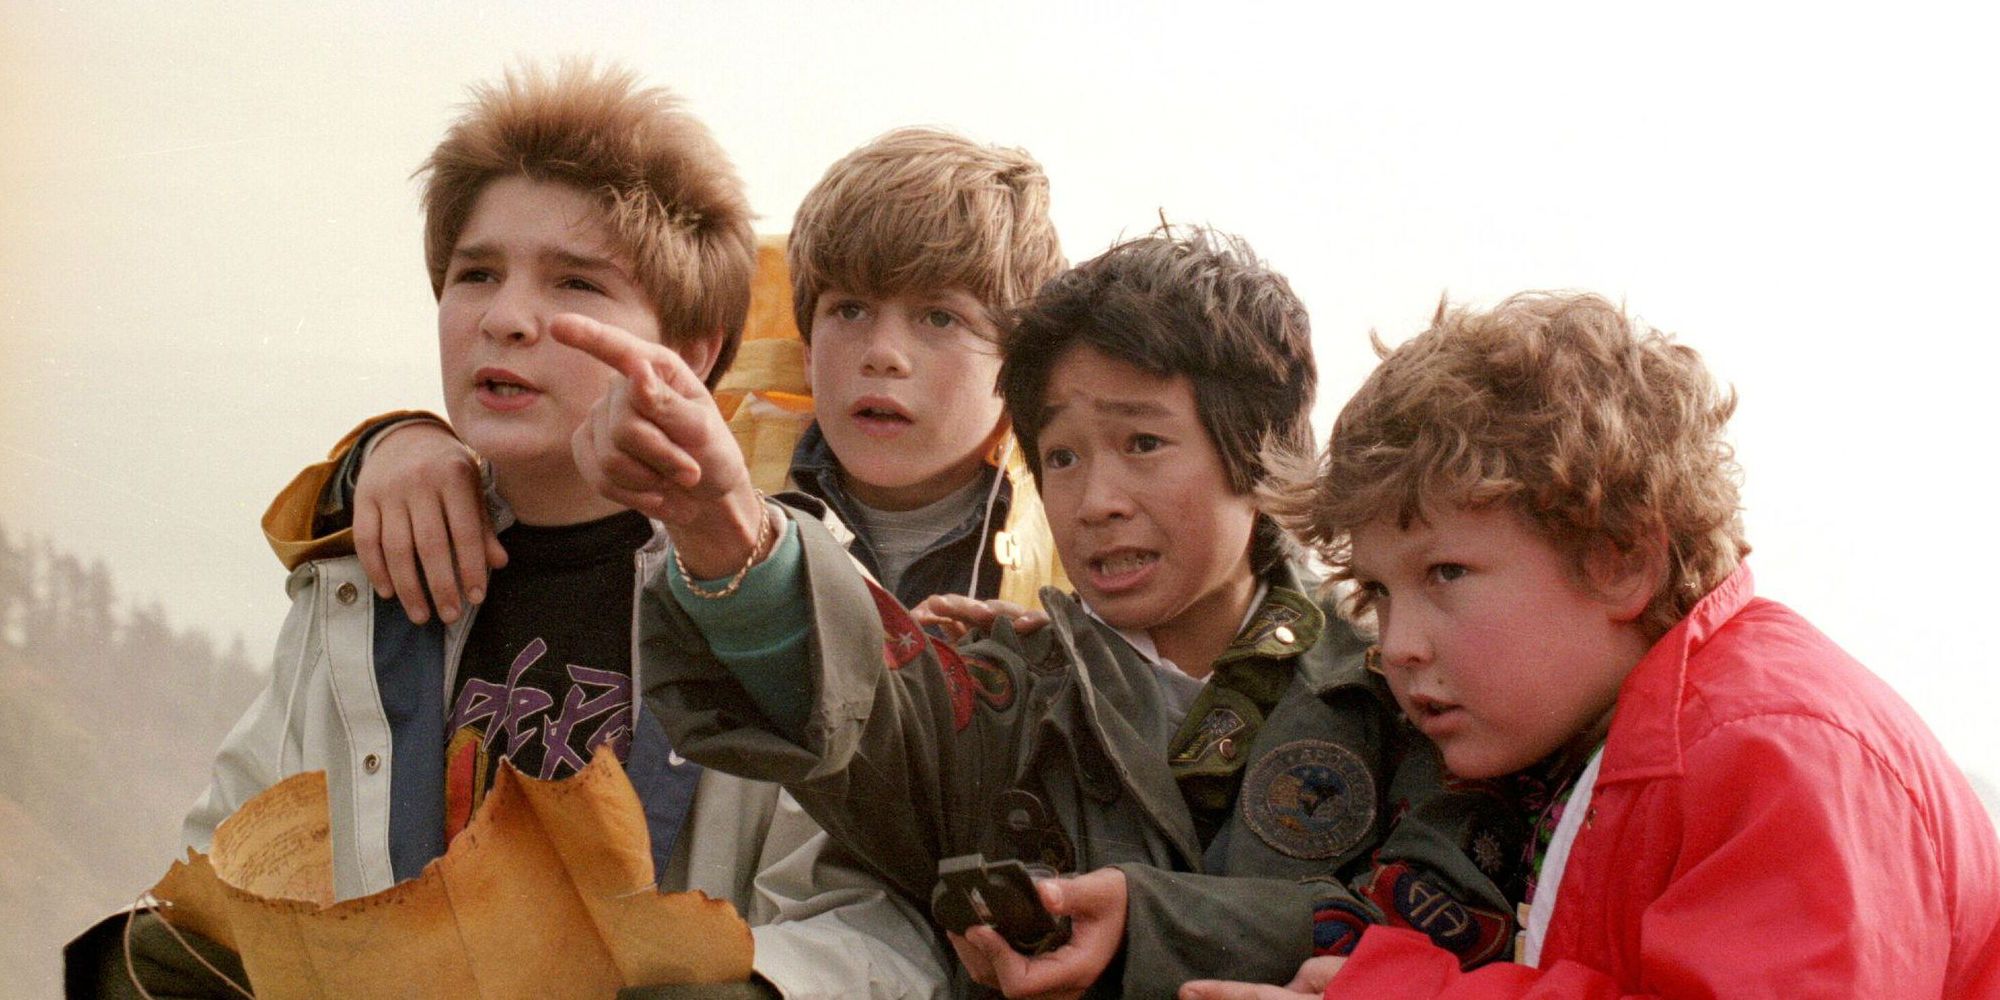 Goonies young cast